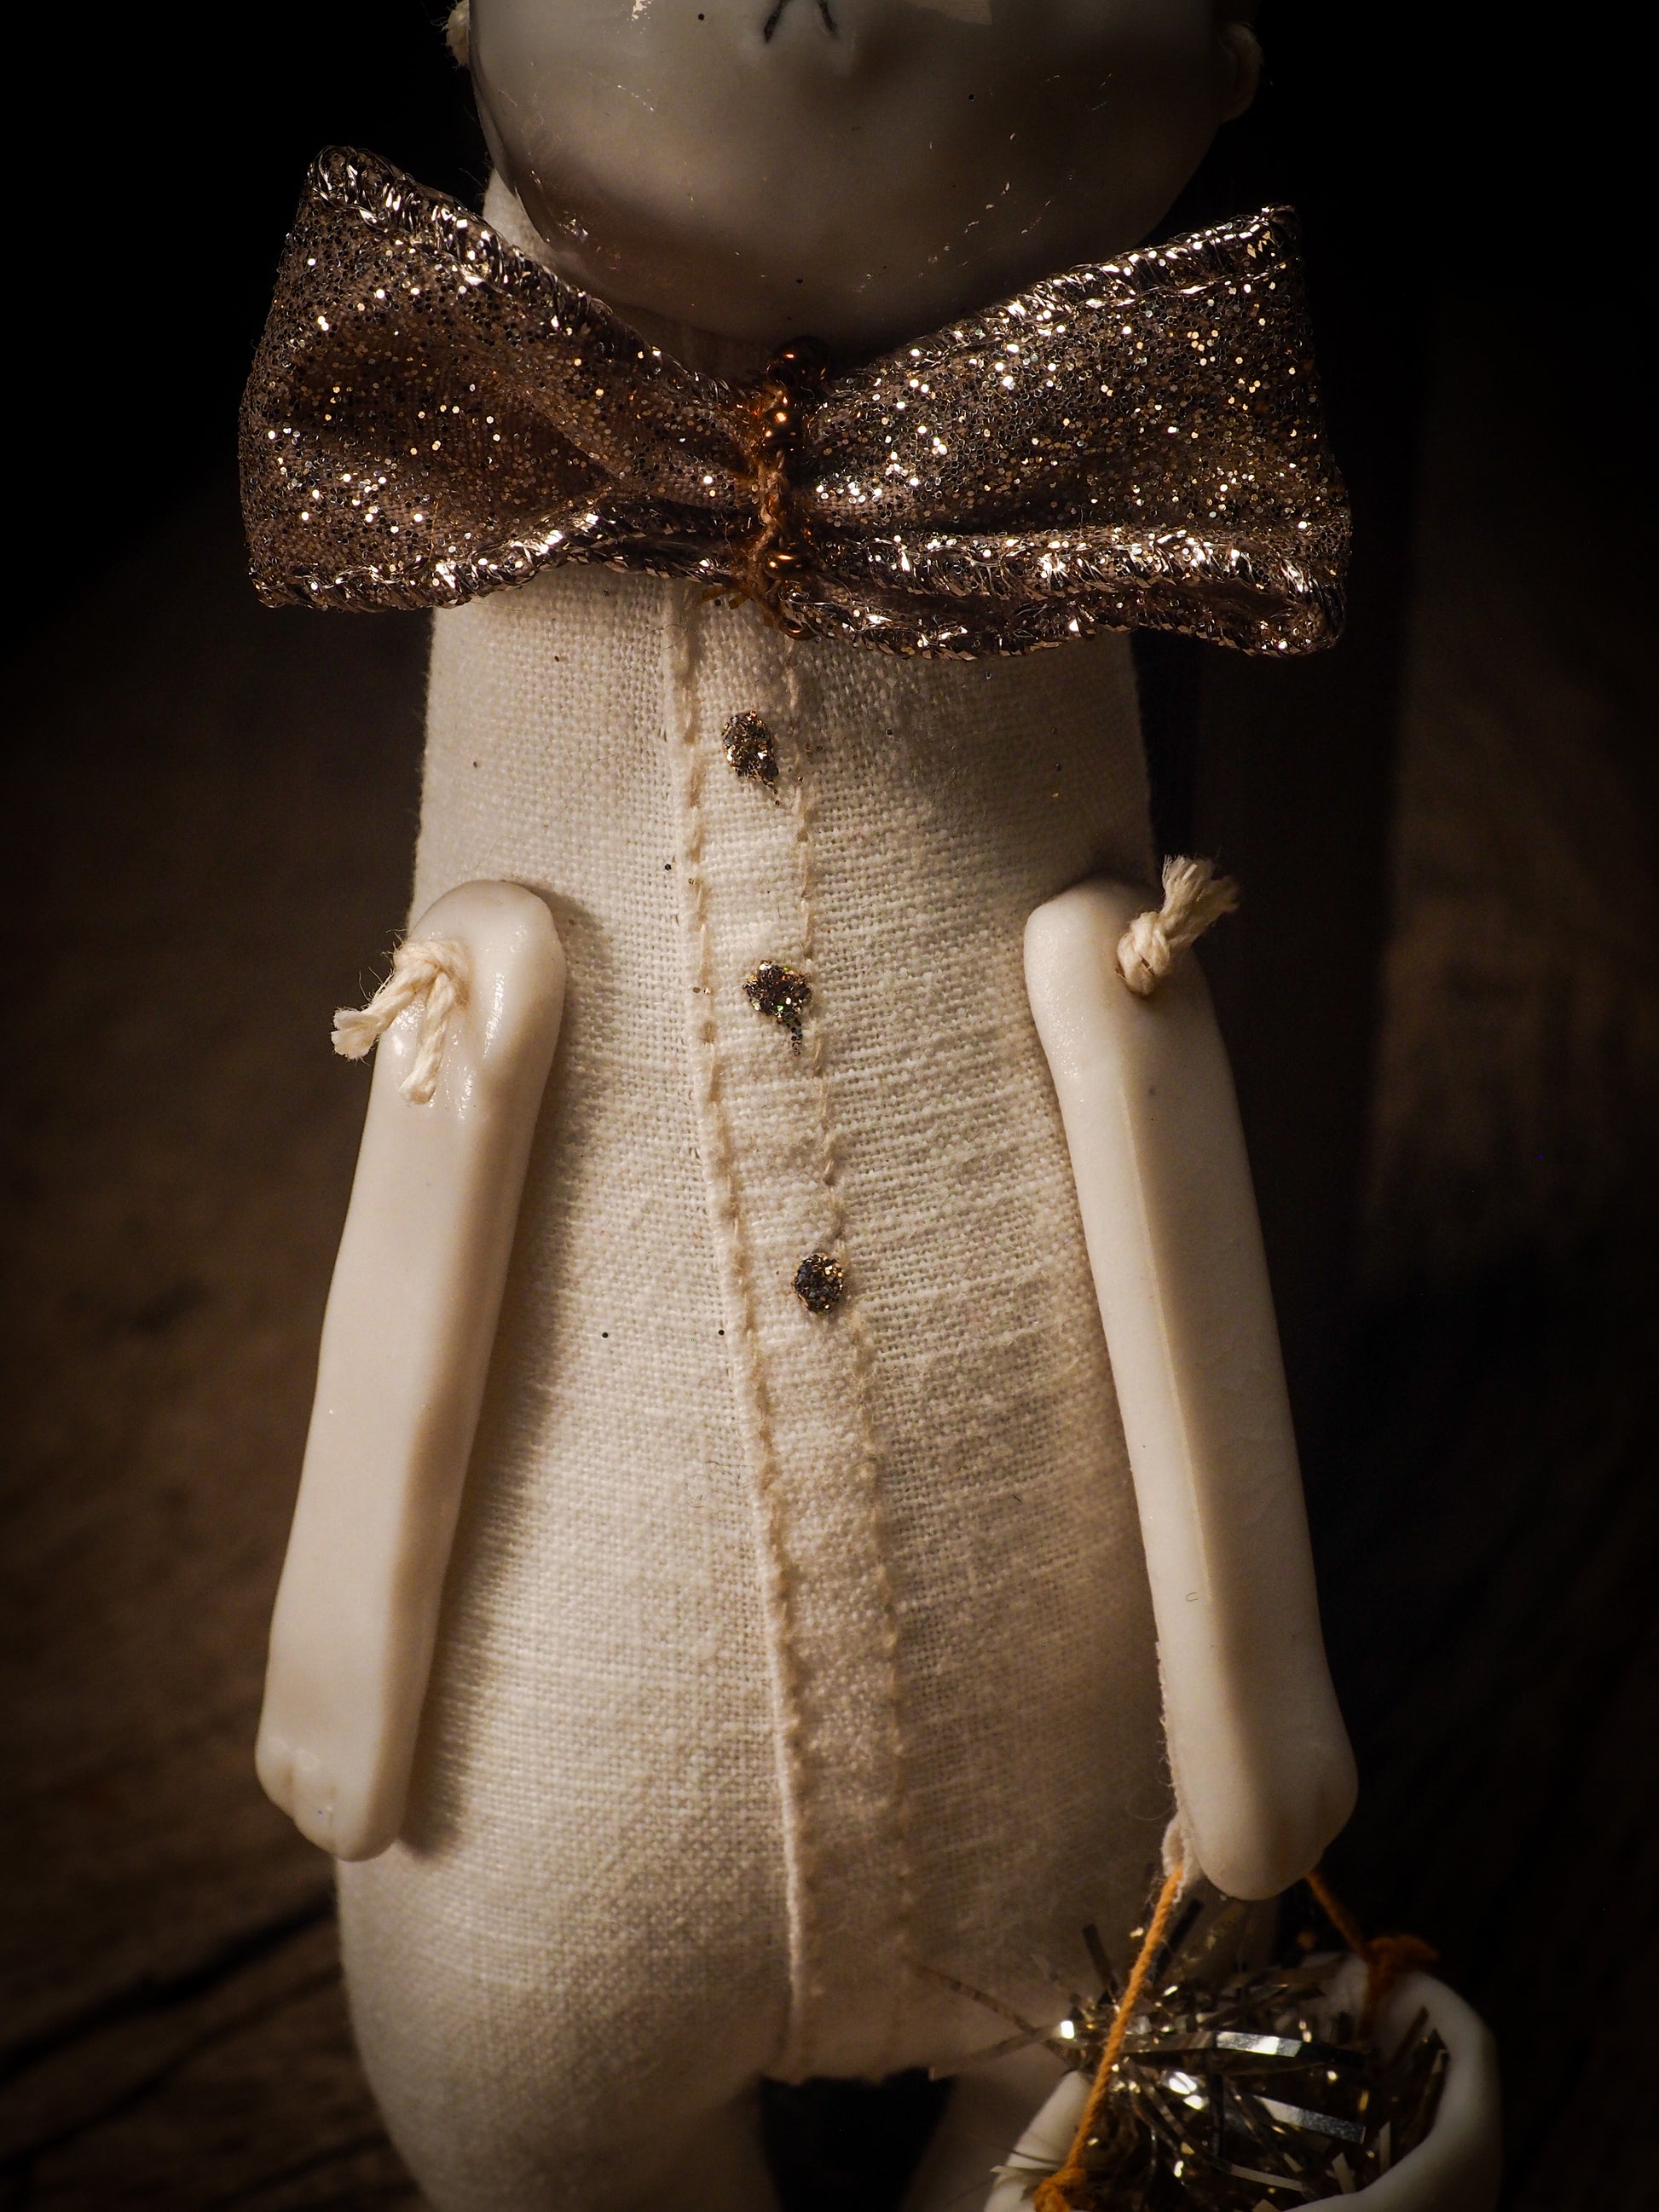 An adorable hand made porcelain and fabric fine art doll by Idania Salcido Danita Art. Perfect to hang as a delicate Christmas tree ornament, this fired ceramic mixed media artwork is unique. Each doll has a beautiful hand sculpted porcelain ceramic face and hand dyed fabric body with vintage accessories as home decor.